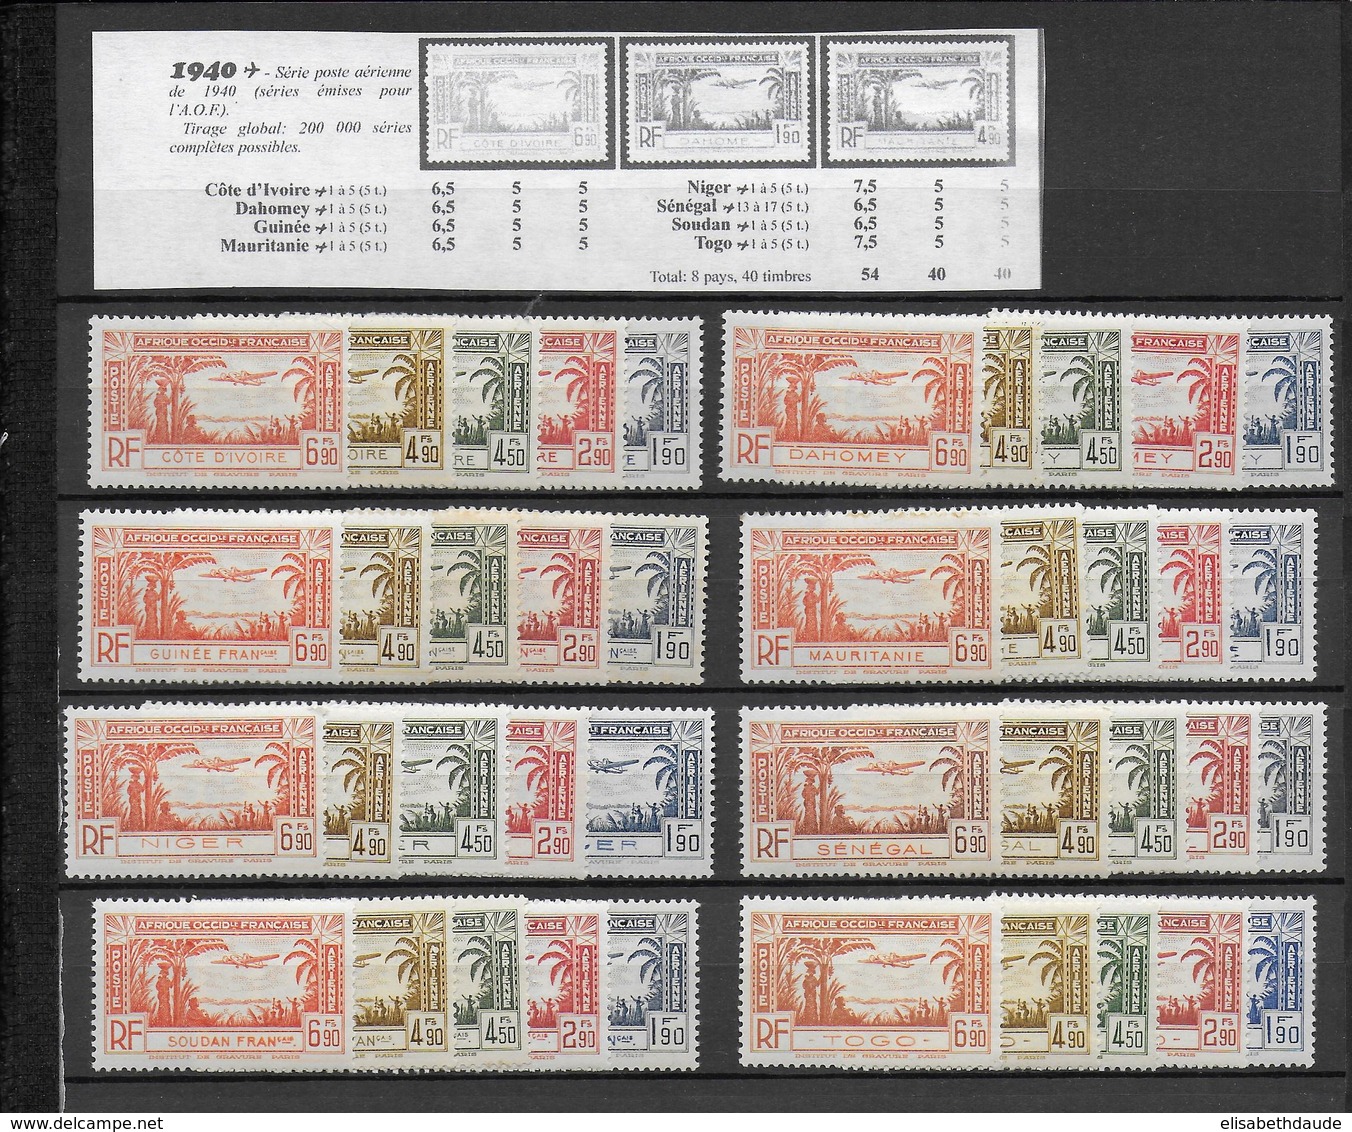 SERIE COLONIALE COMPLETE - 1940  - POSTE AERIENNE -  * MLH CHARNIERE LEGERE - COTE MAURY = 40 EURO - Ohne Zuordnung